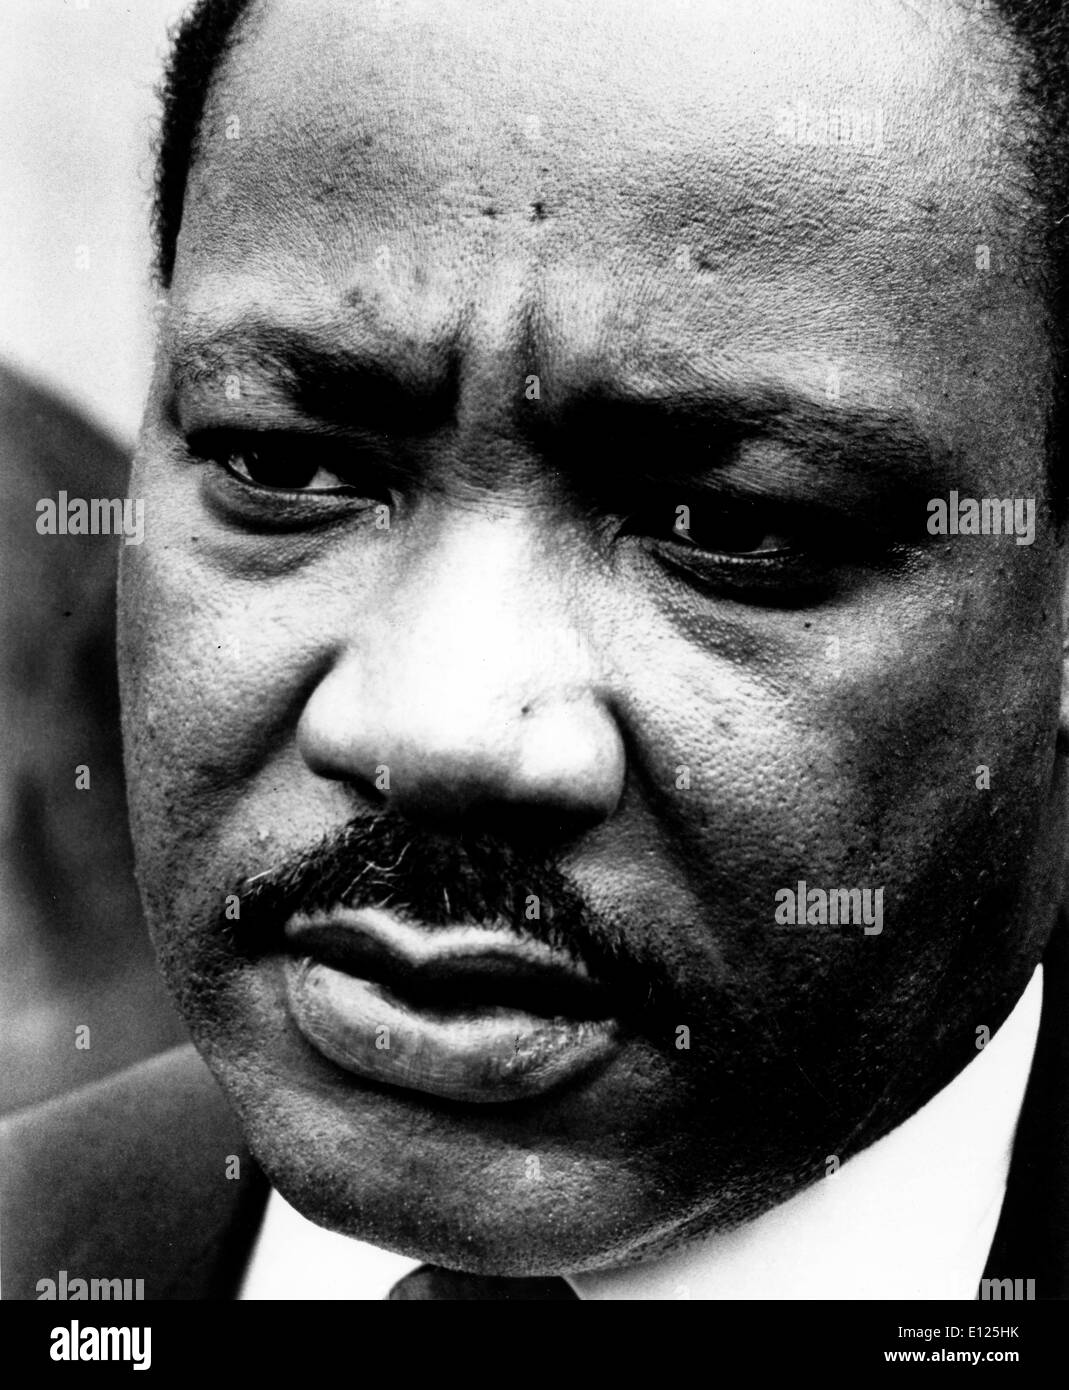 Jan 02, 2005; New York, NY, USA; File Photo. Date Unknown Reverend MARTIN LUTHER KING JR. Stock Photo